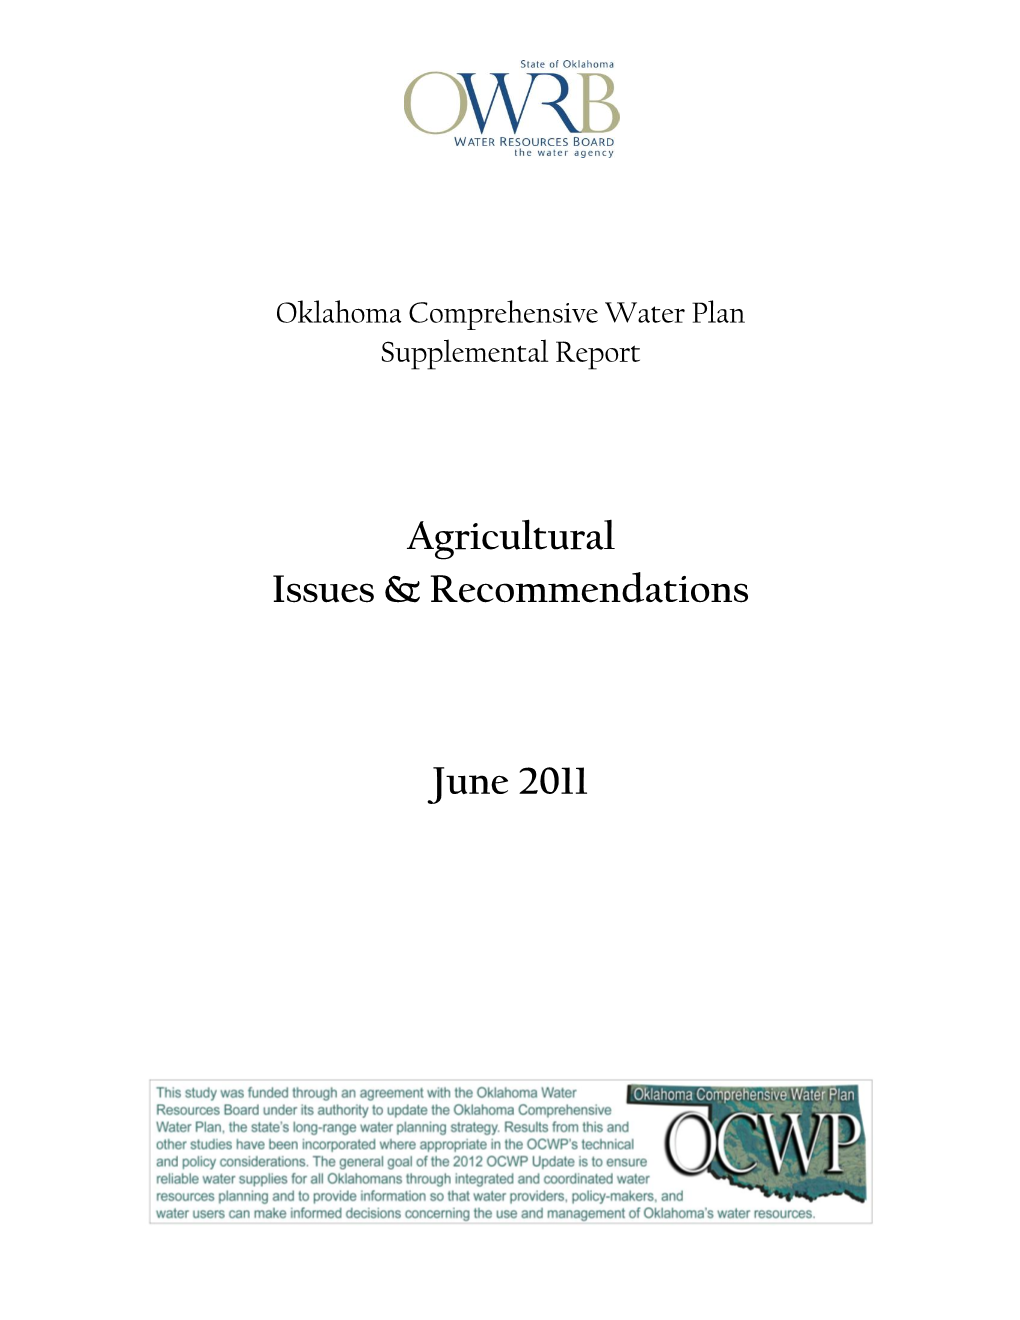 Oklahoma Agricultural Water Issues and Recommendations